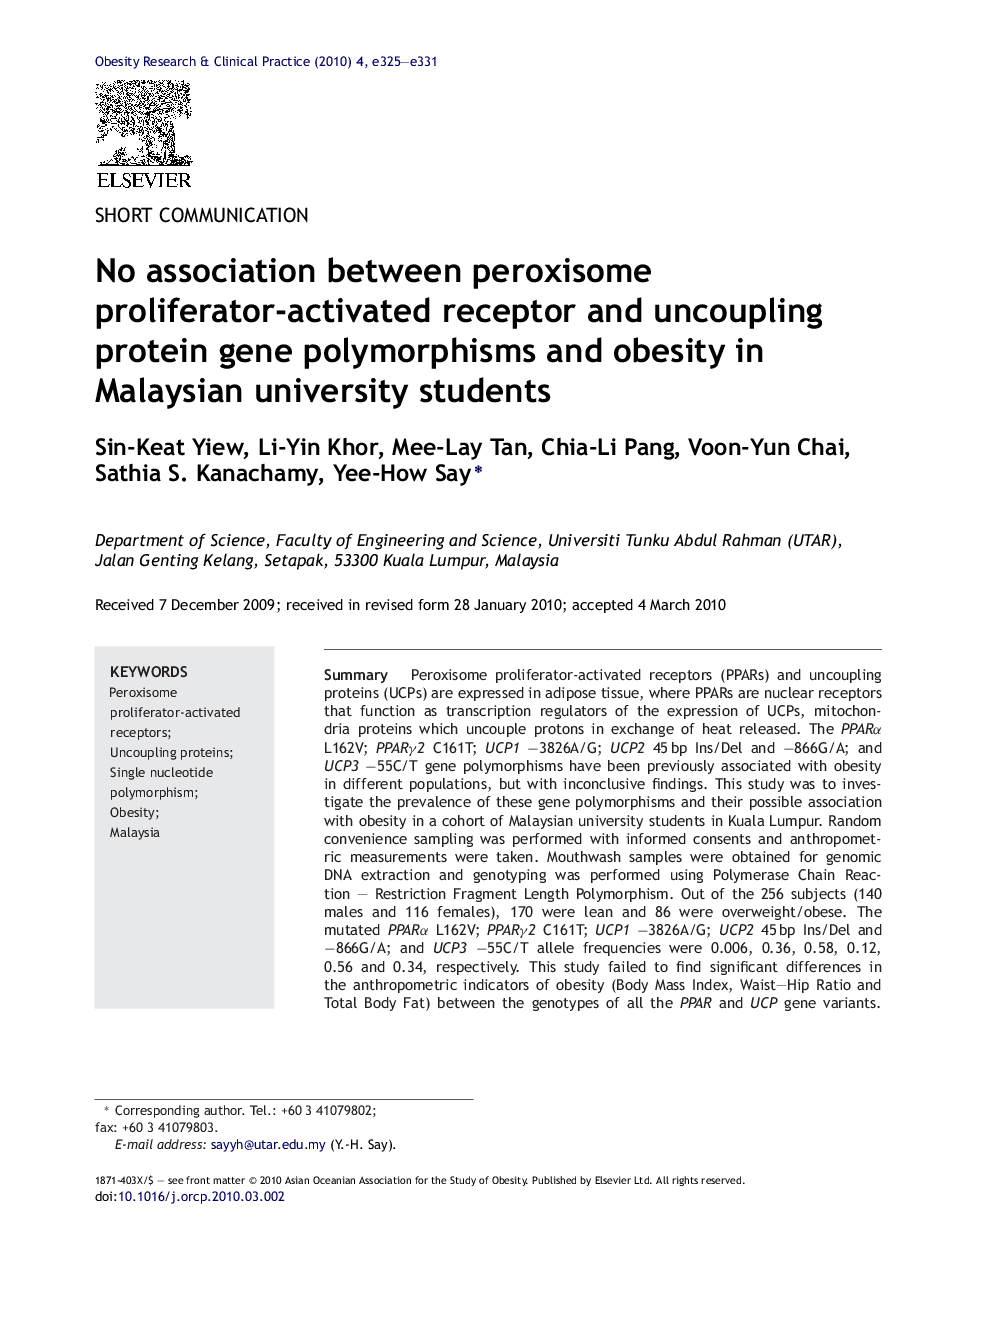 No association between peroxisome proliferator-activated receptor and uncoupling protein gene polymorphisms and obesity in Malaysian university students